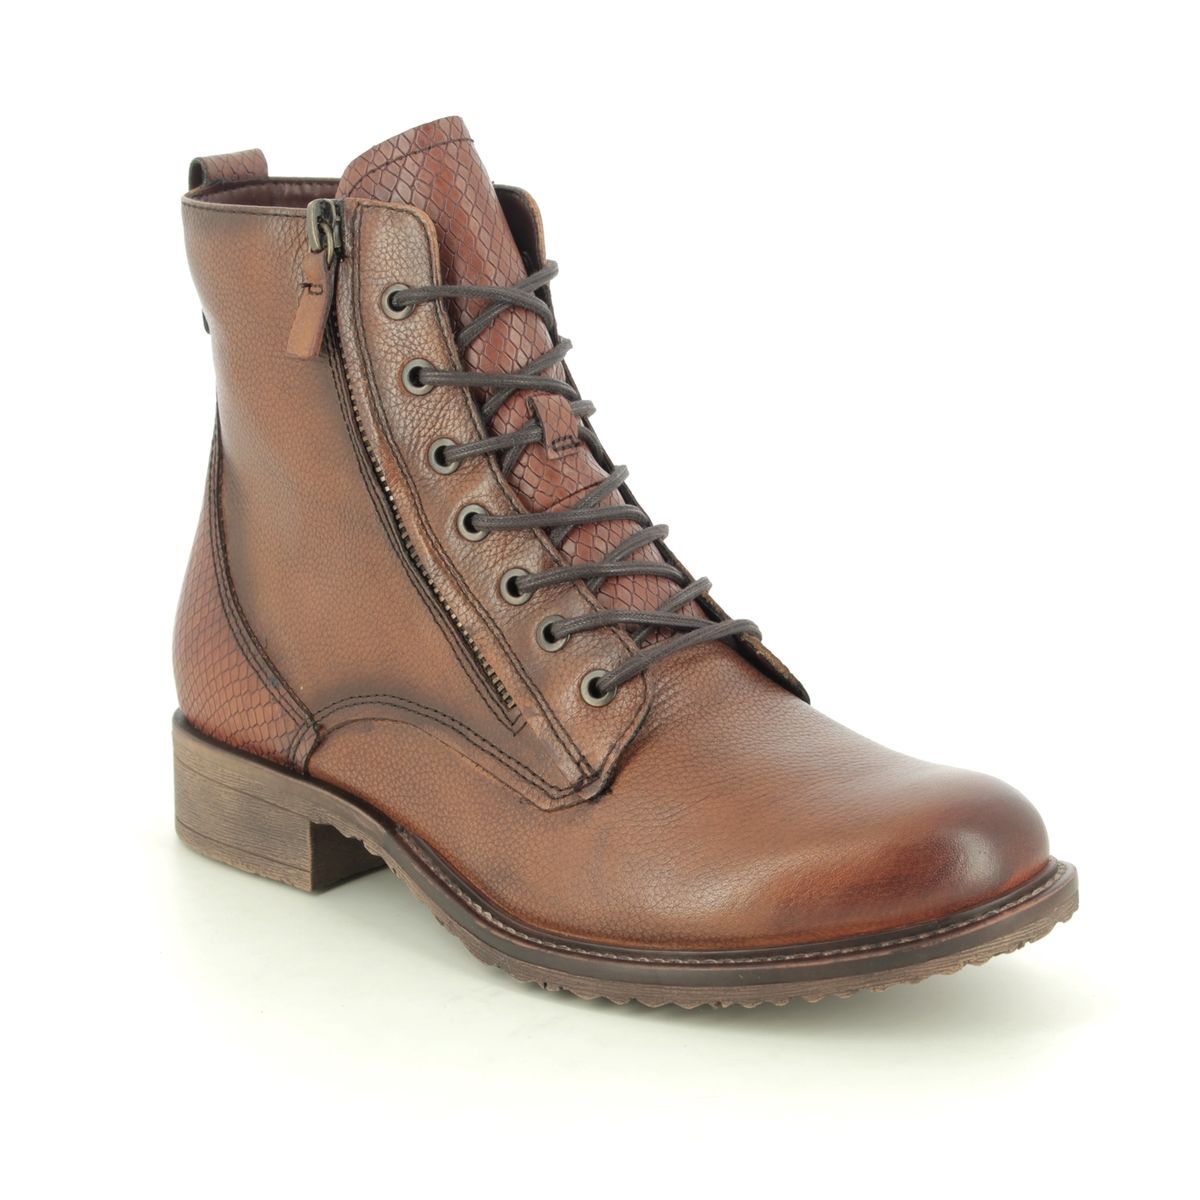 Tamaris Anouk Tan Leather  Womens Lace Up Boots 25211-25-378 In Size 36 In Plain Tan Leather